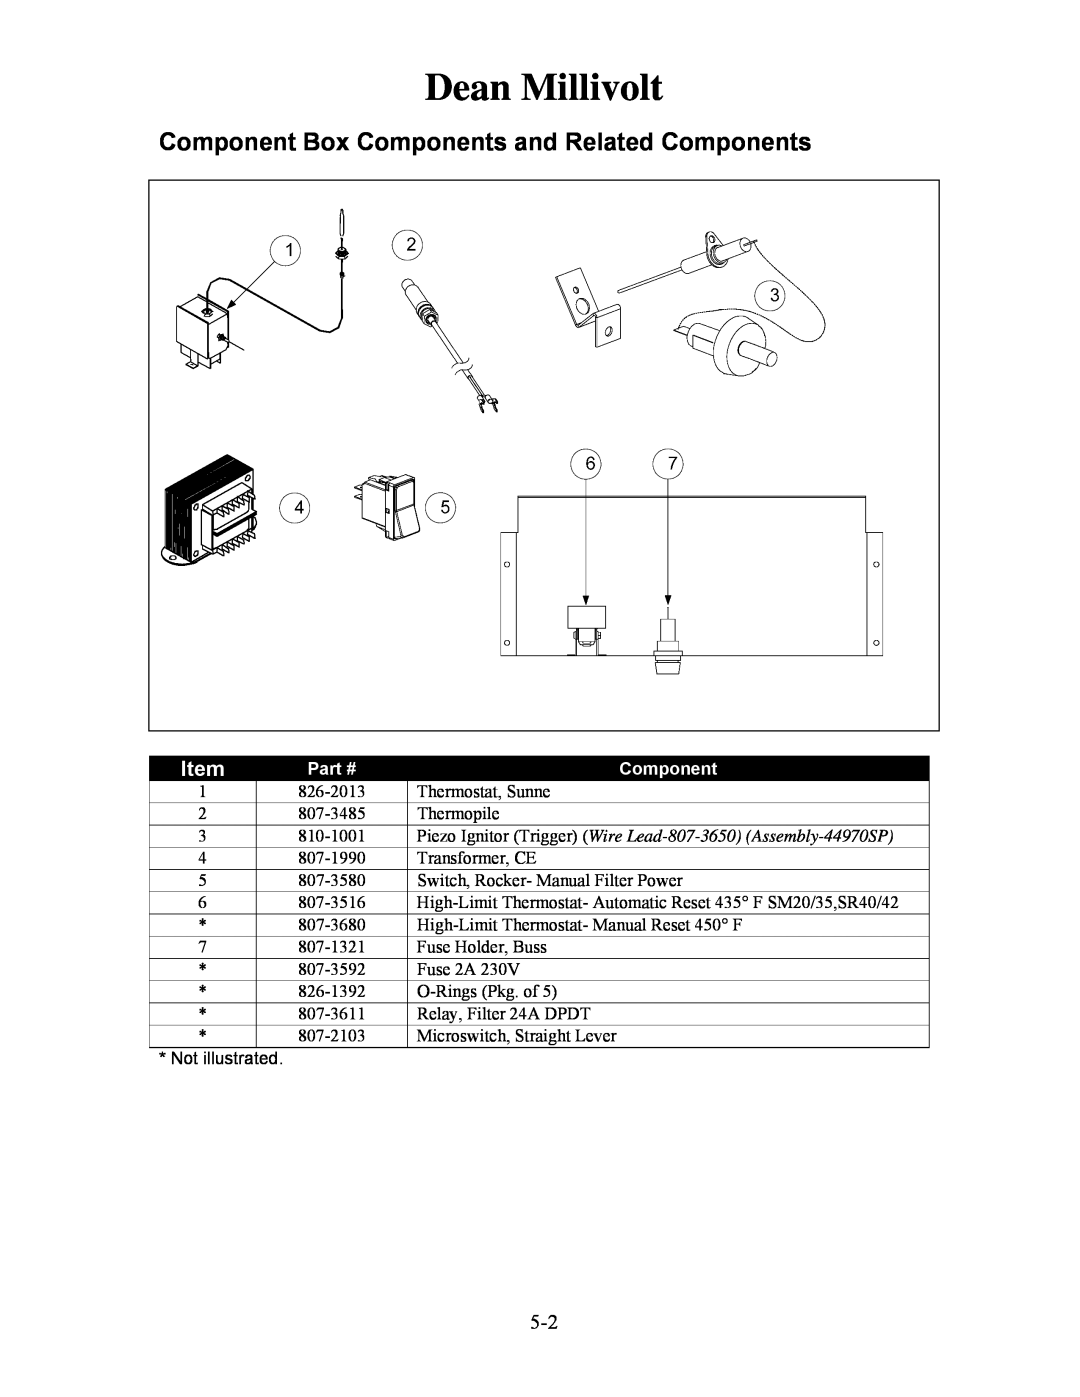 Frymaster H55 manual Component Box Components and Related Components, Dean Millivolt 